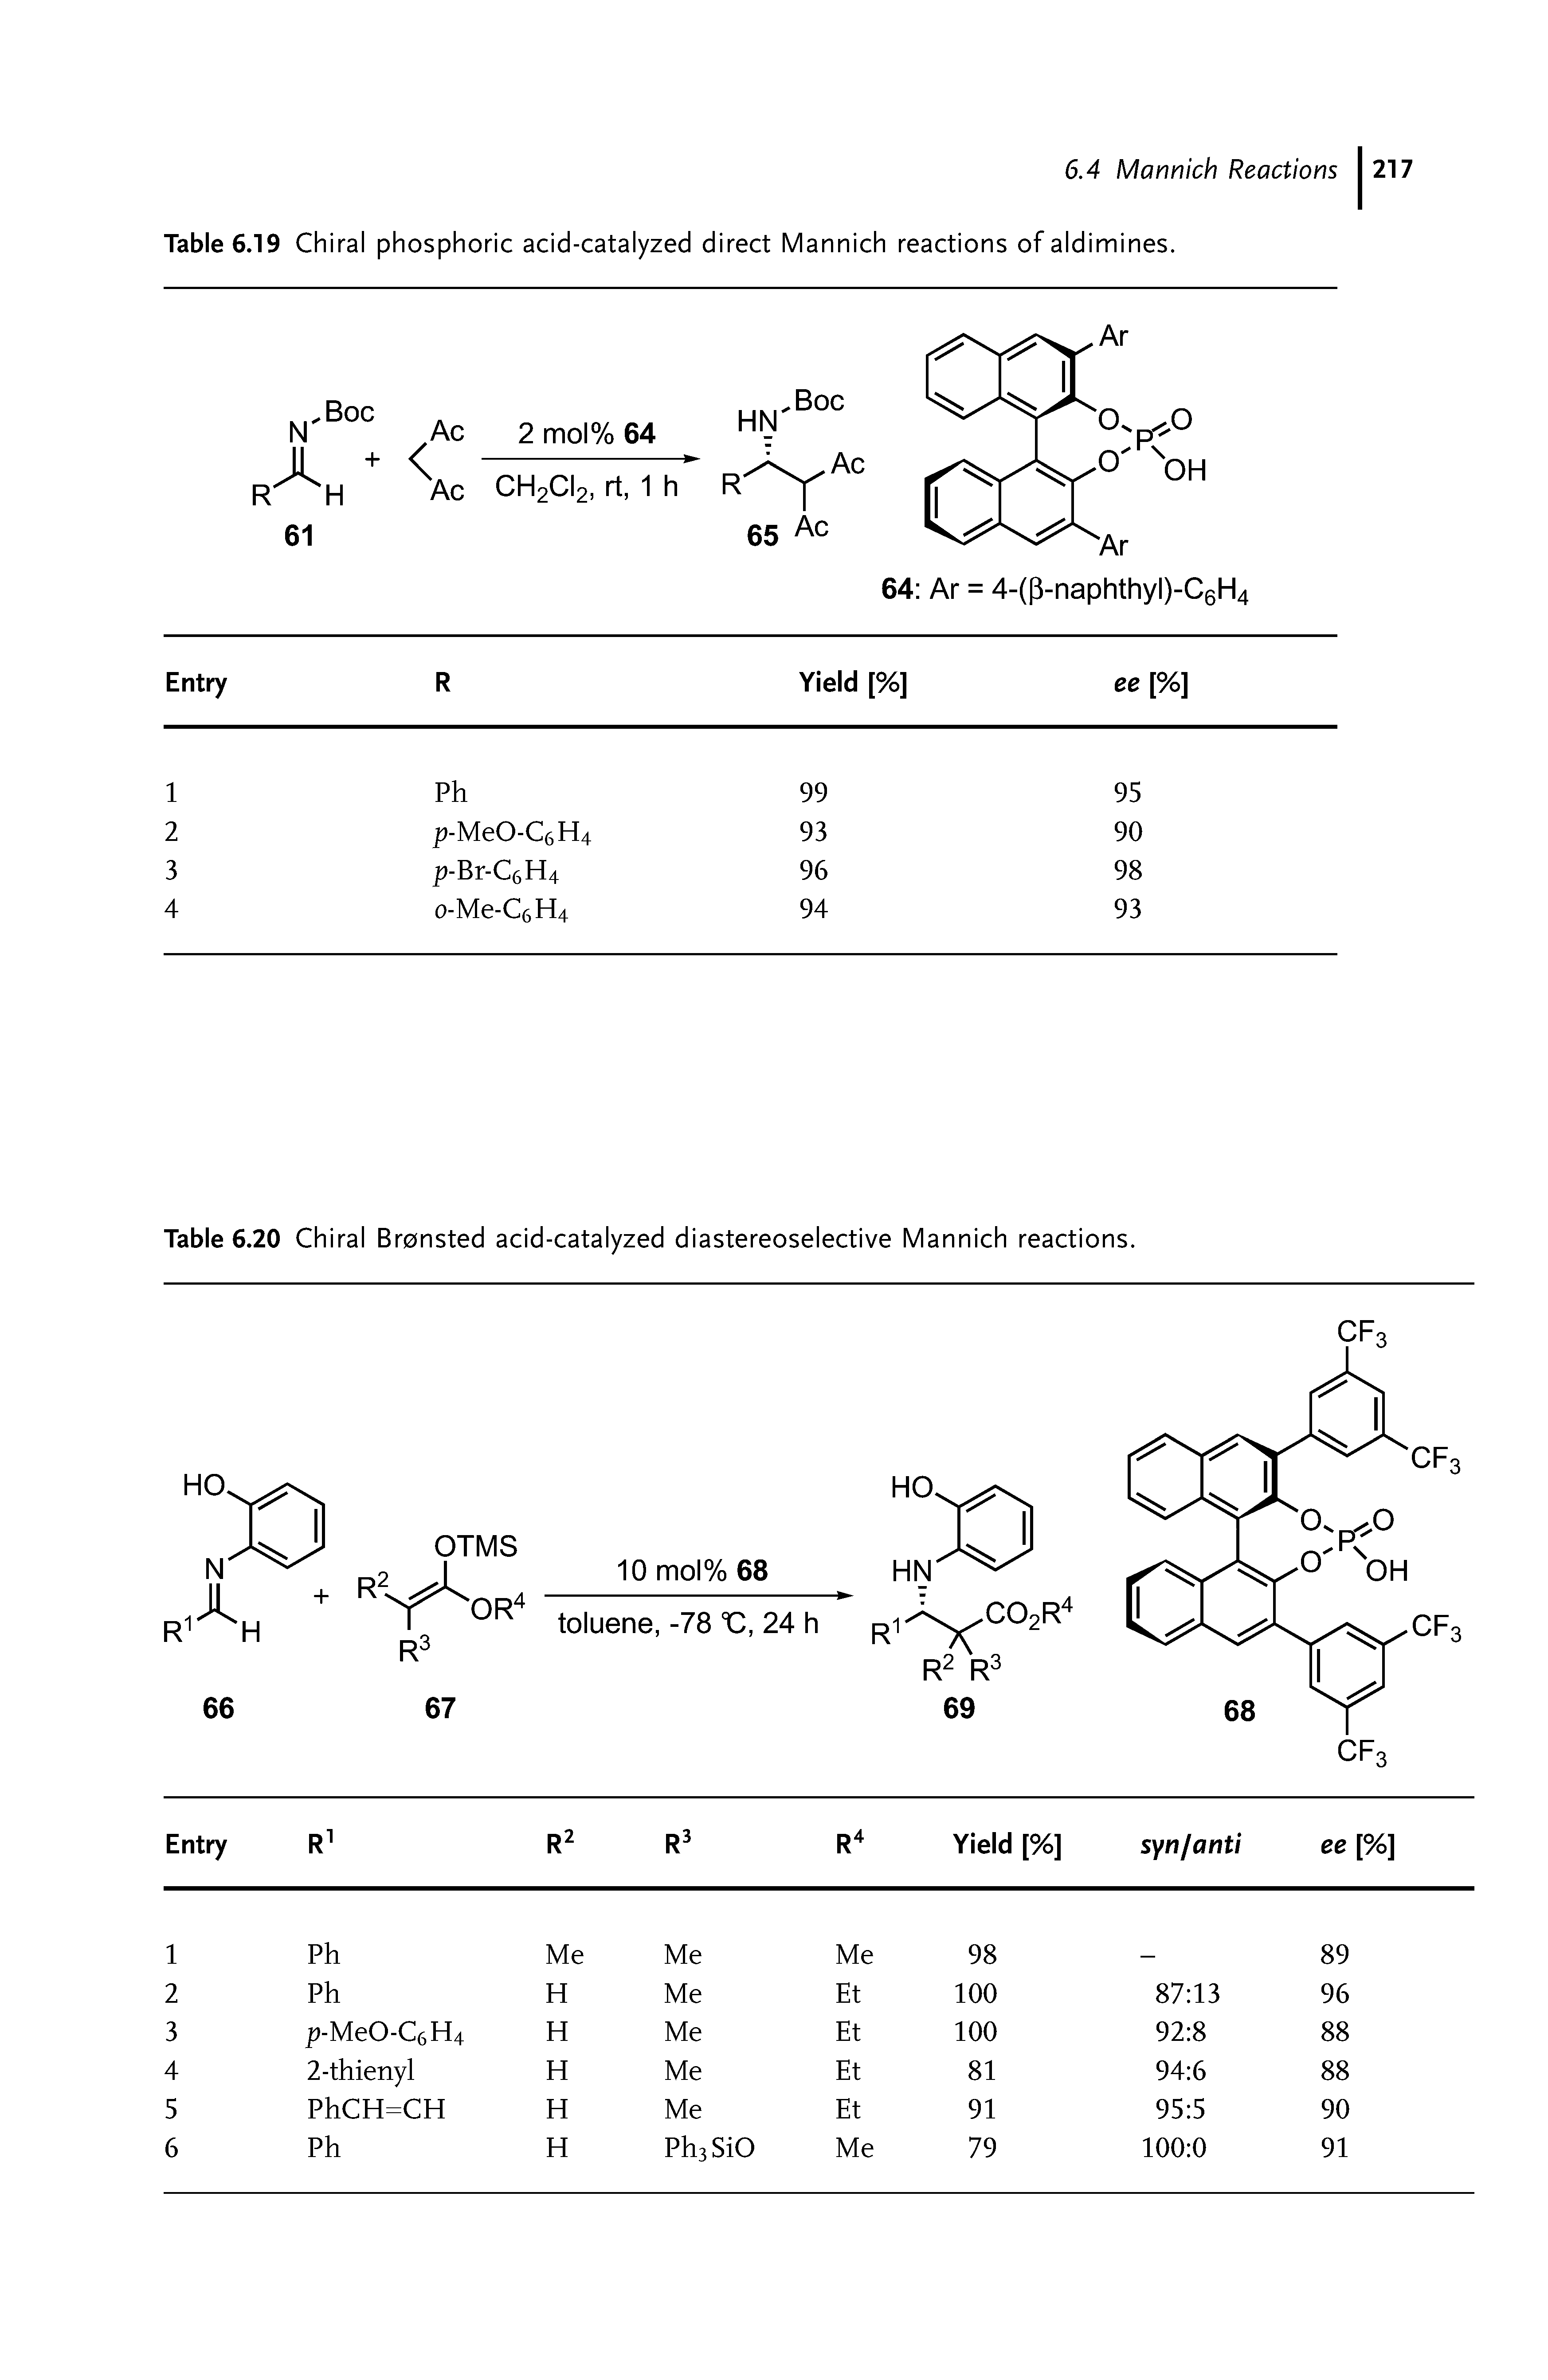 Table 6.20 Chiral Bronsted acid-catalyzed diastereoselective Mannich reactions.